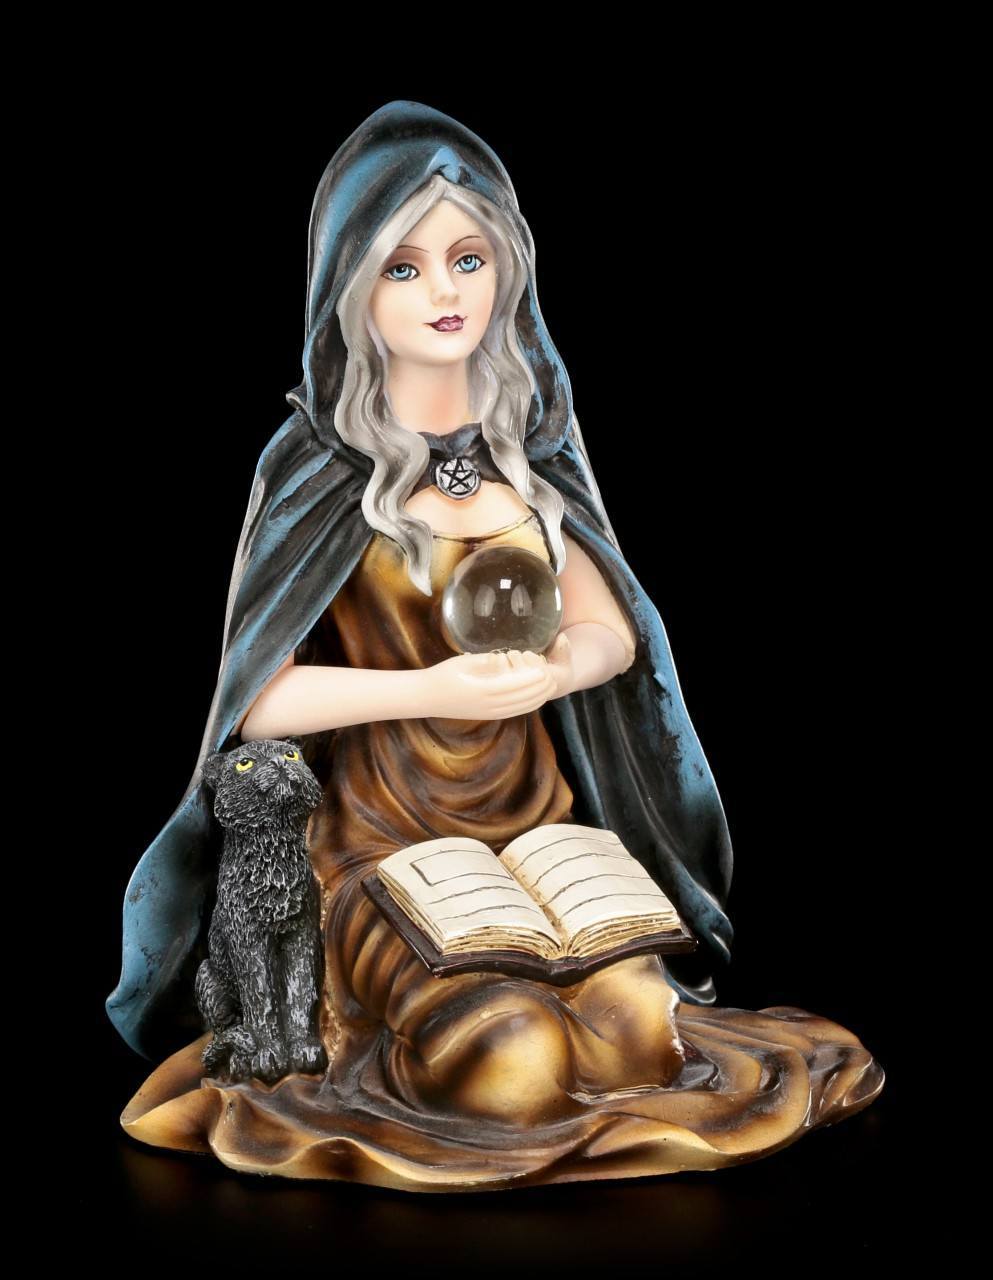 Witch Figurine - Misty with black Cat and Spellbook